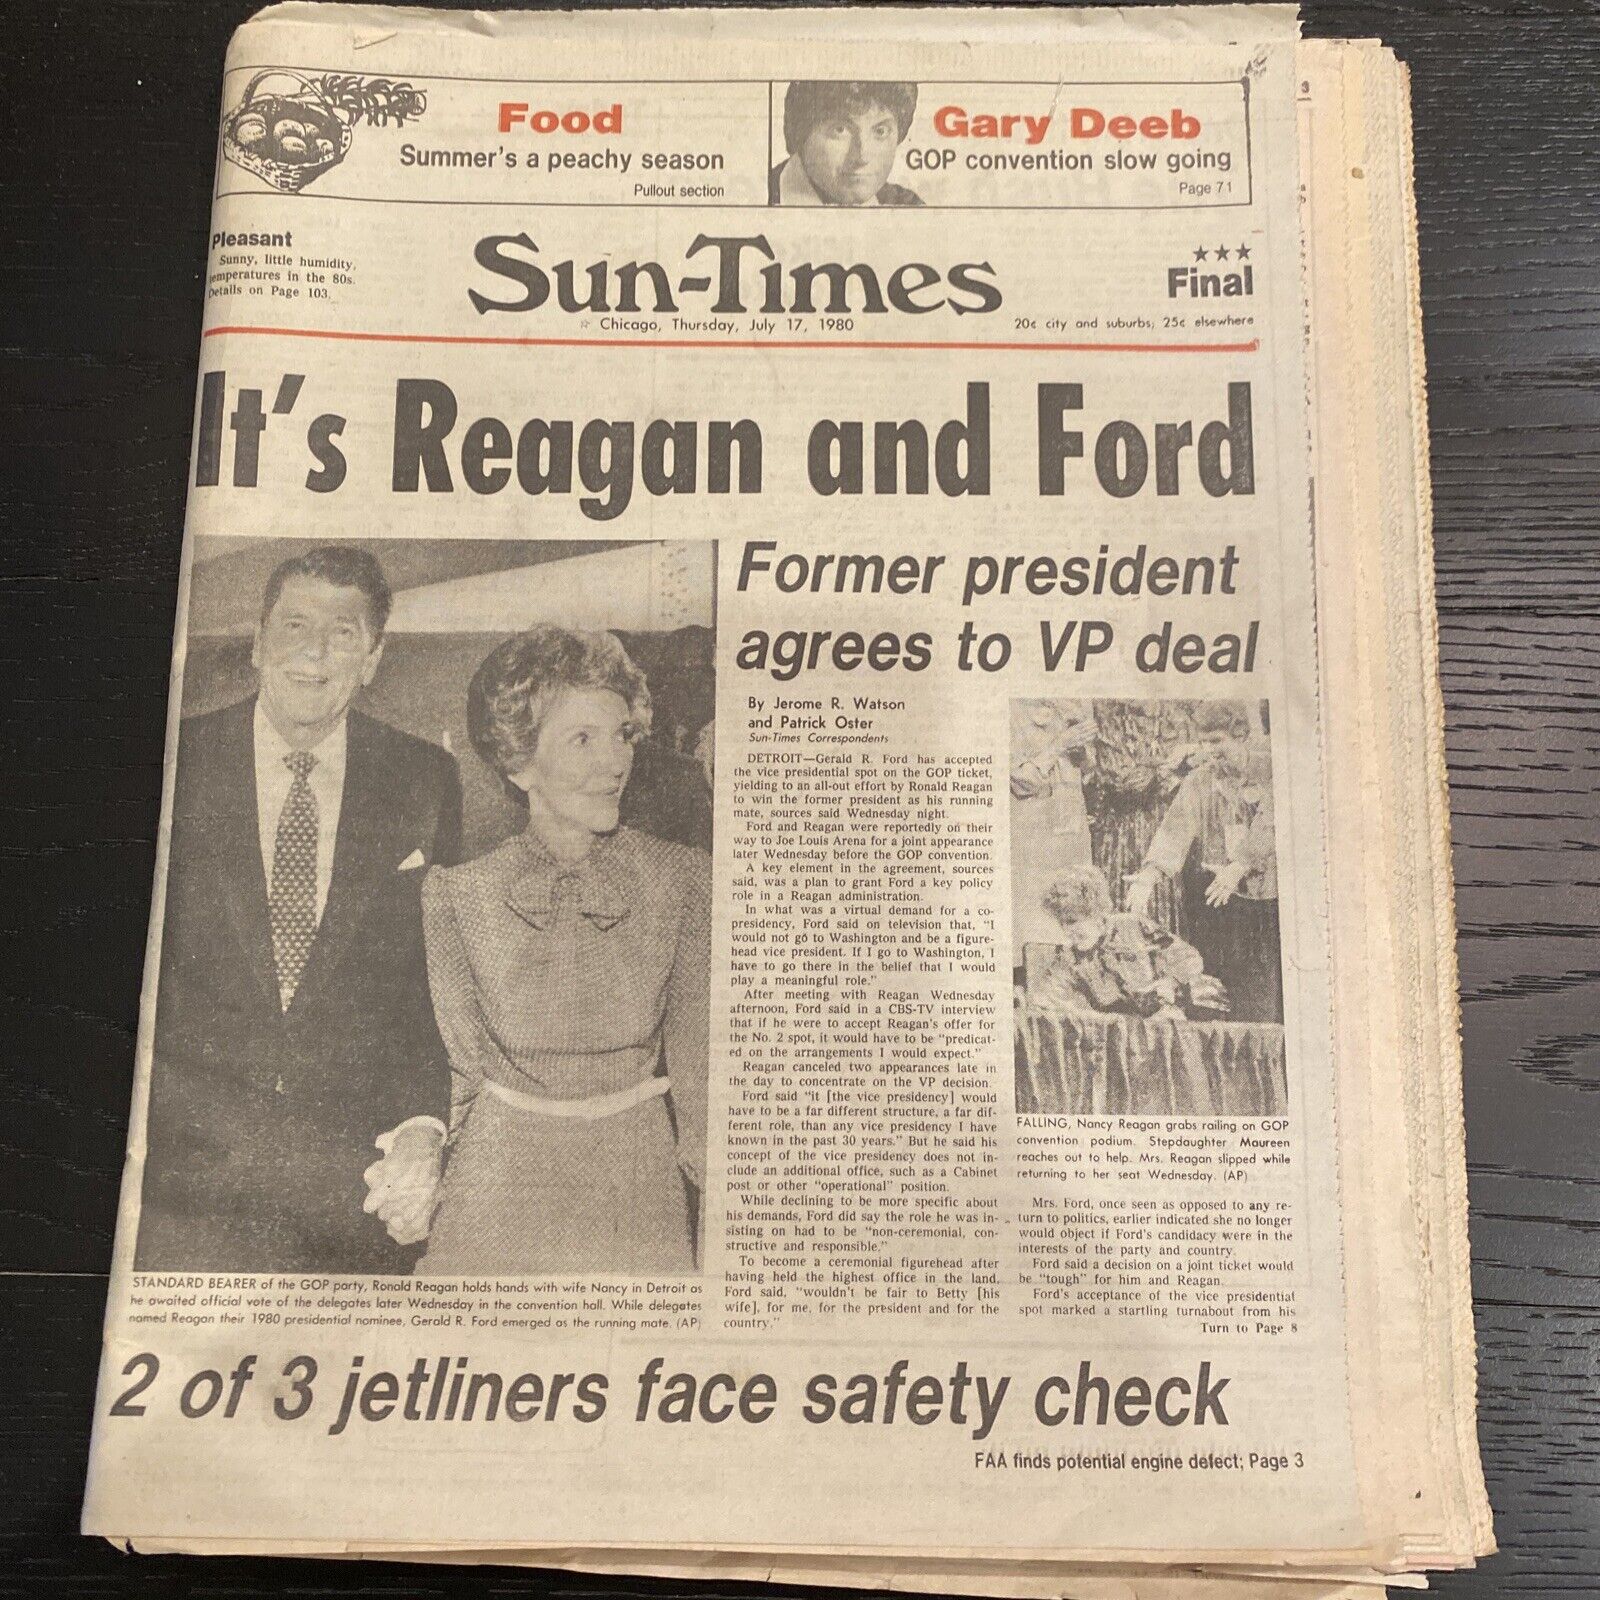 Original July 17, 1980 Chicago Tribune “It’s Reagan and Ford” “mistake”